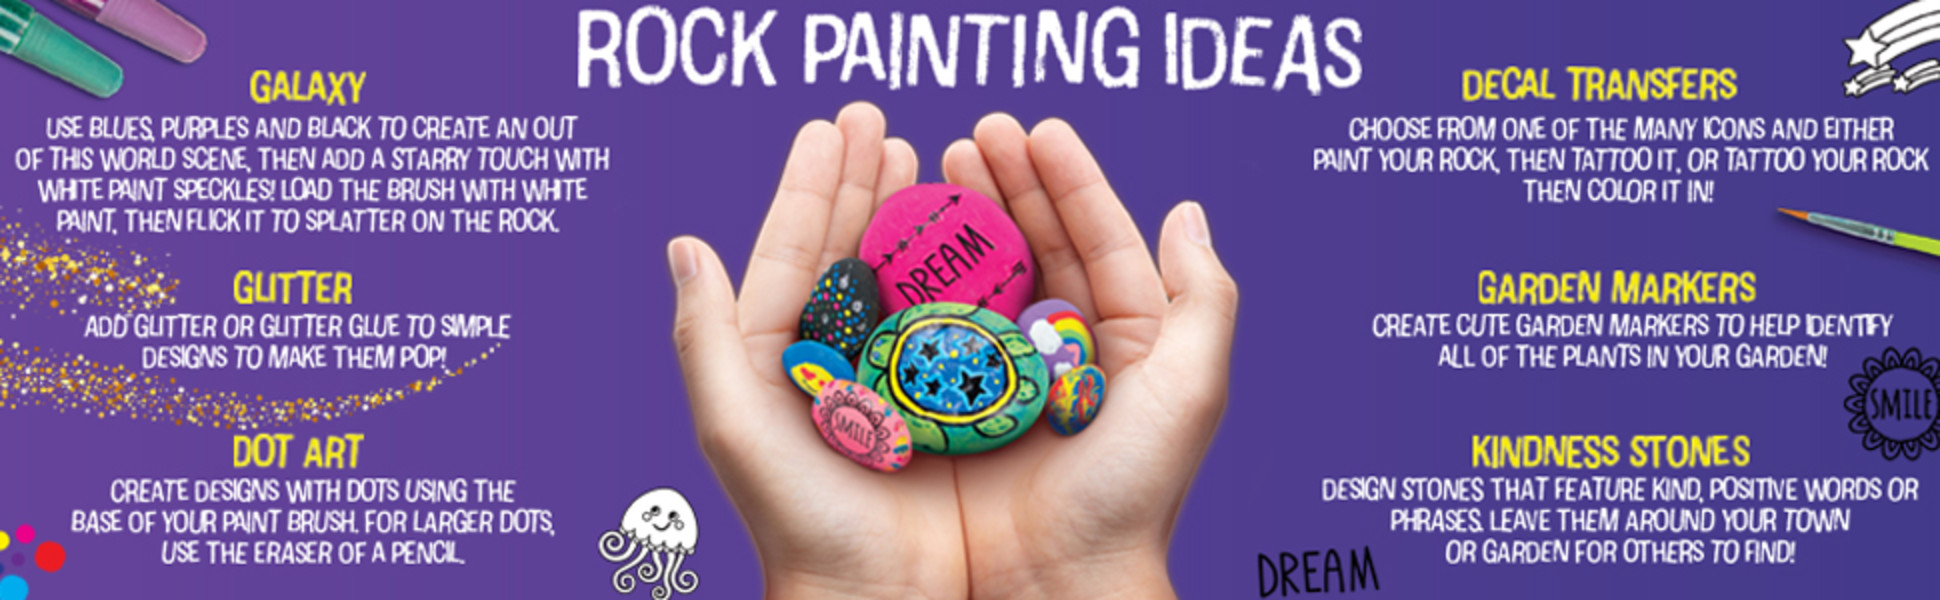 Amav Toys Graffit Rock Paint Kit- All Supplies Included - Best DIY Craft,  Pai